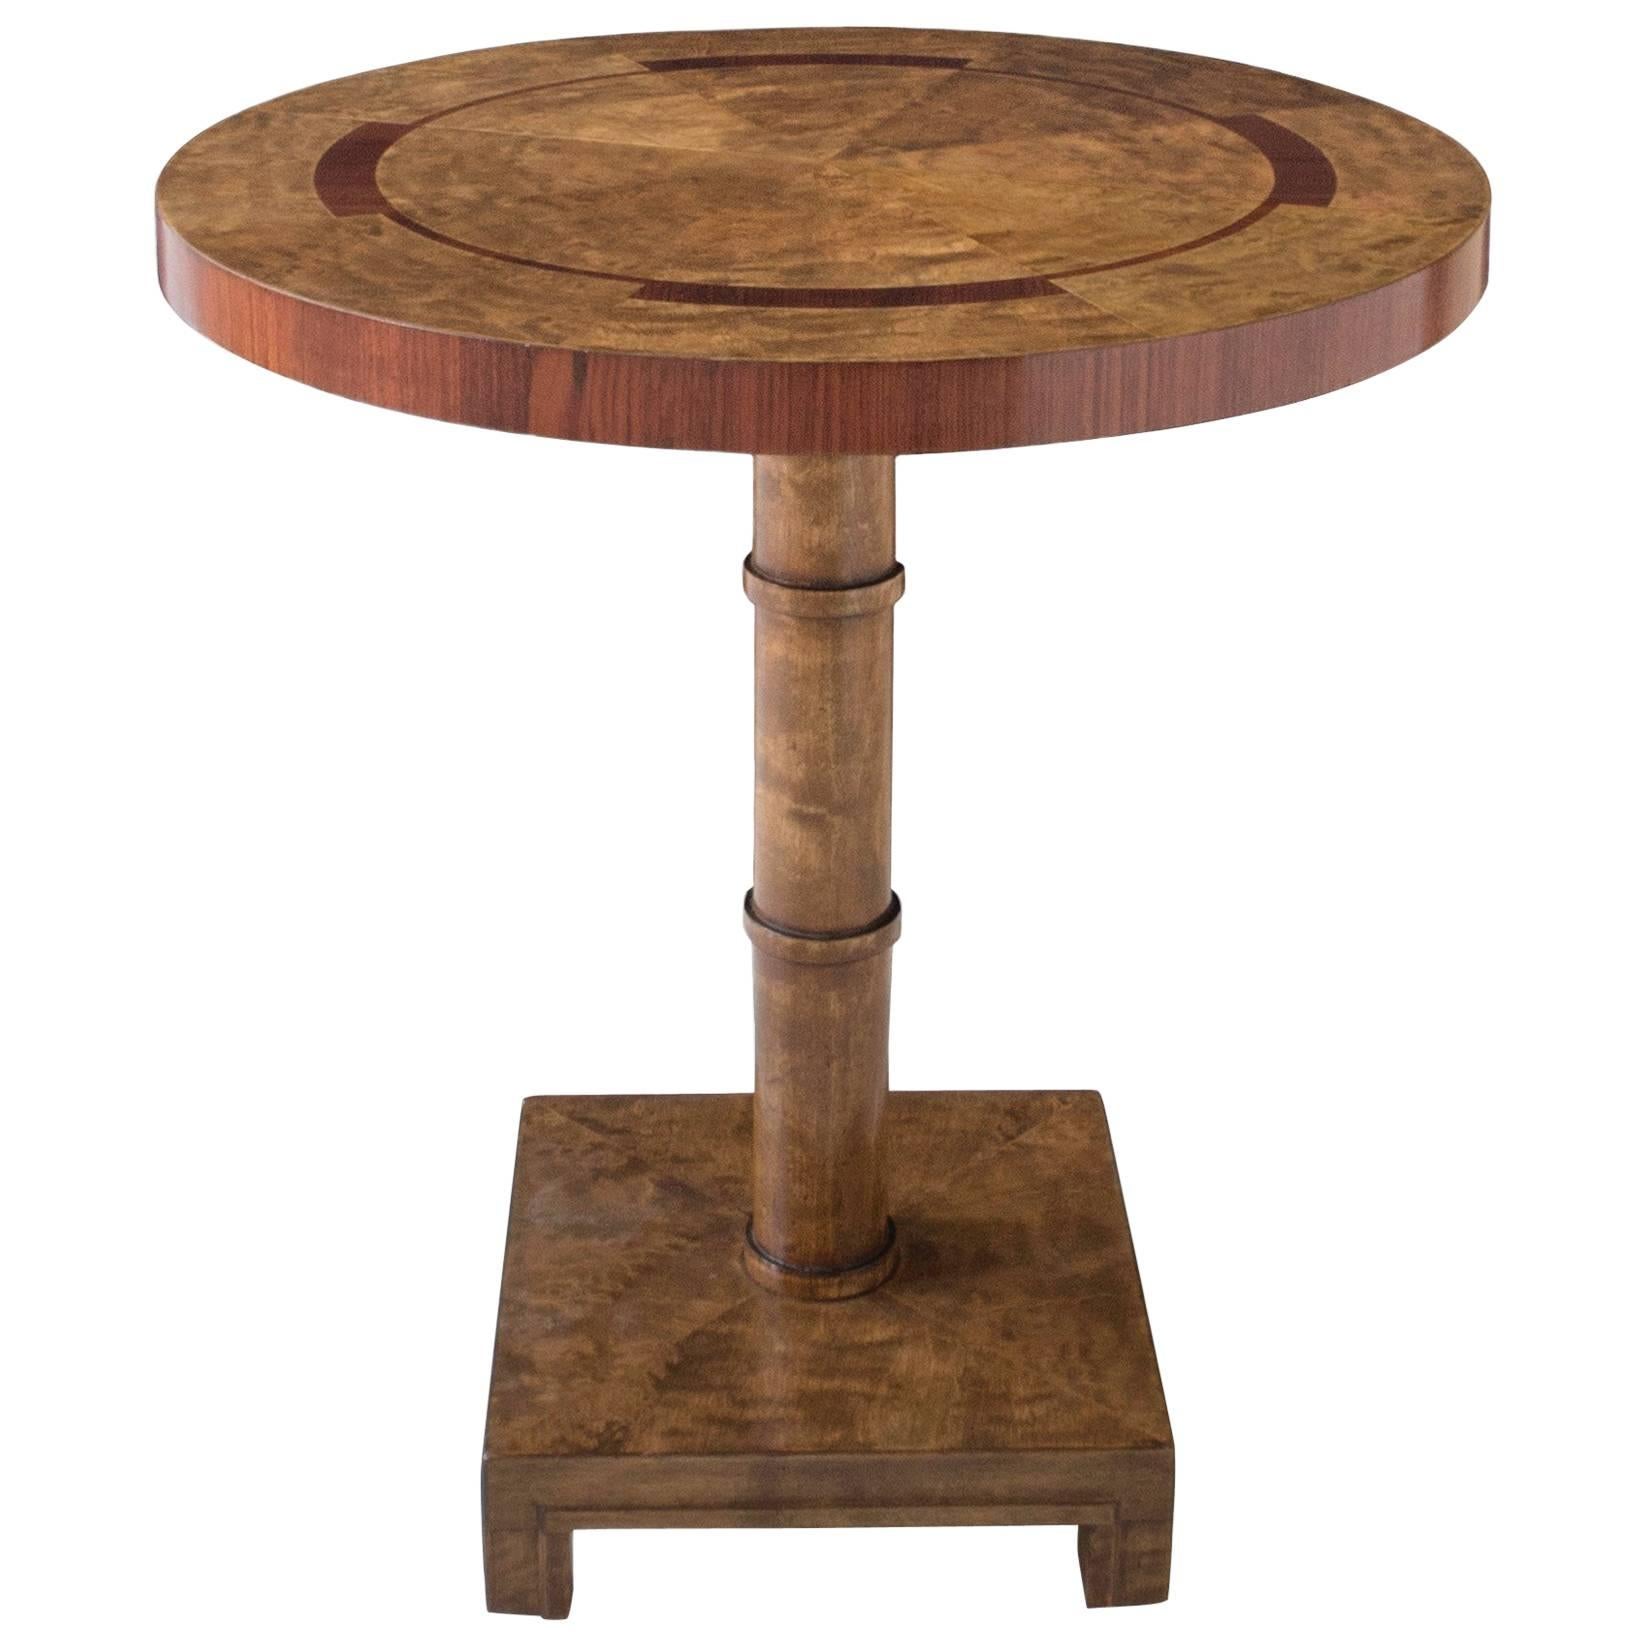 Axel Einar Hjorth Attributed, Swedish Birch and Rosewood Small Side Table